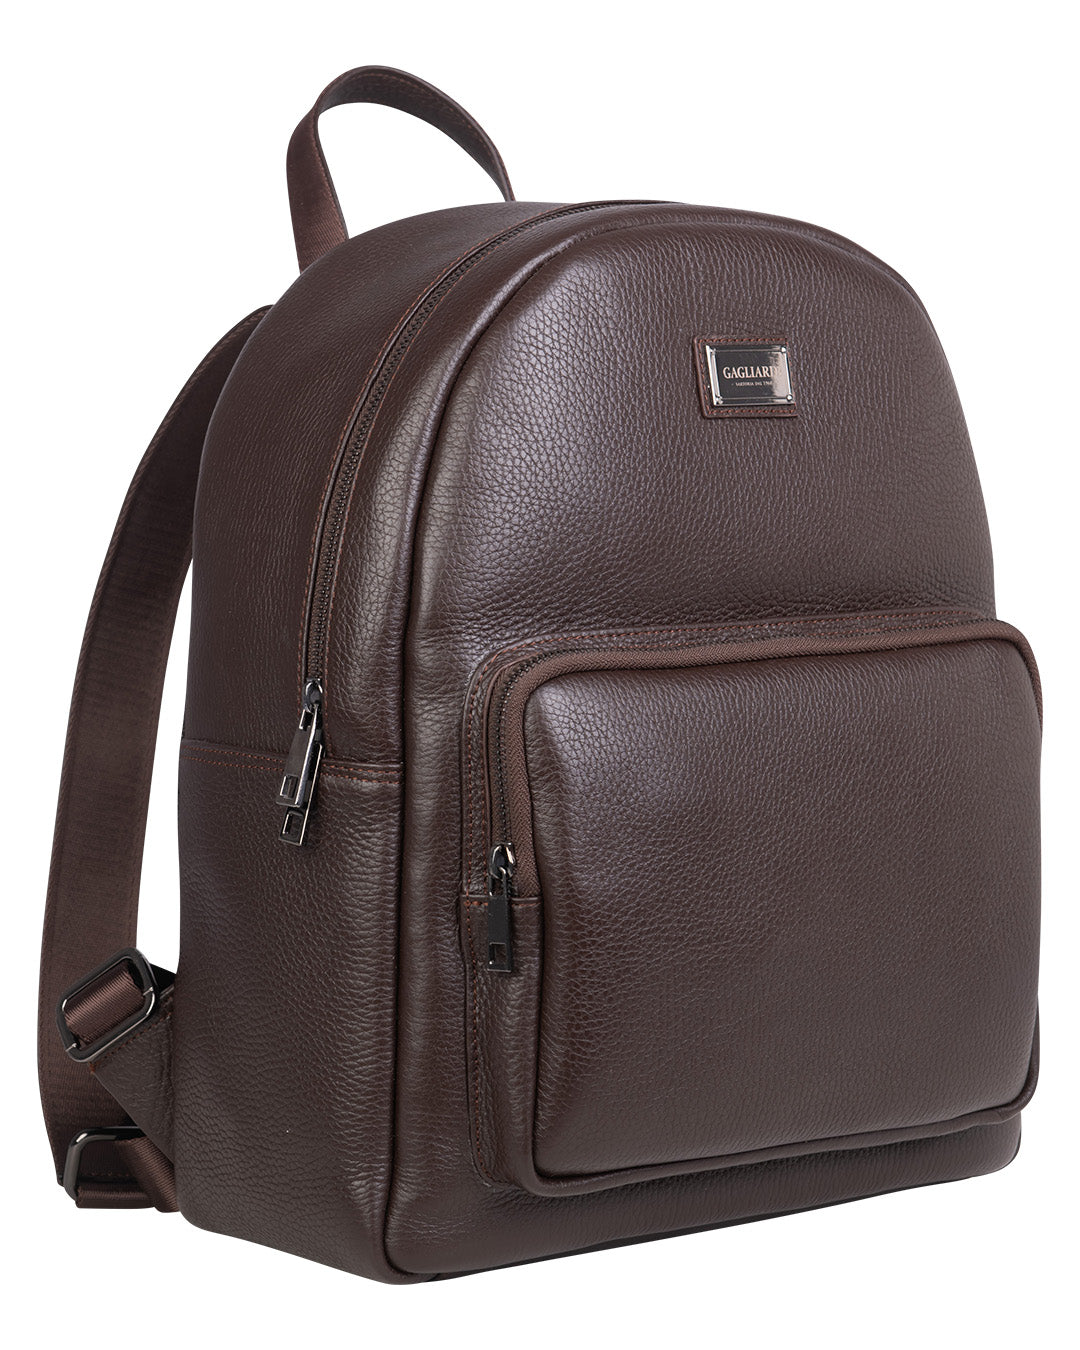 Brown Scotch Grain Leather Back Pack